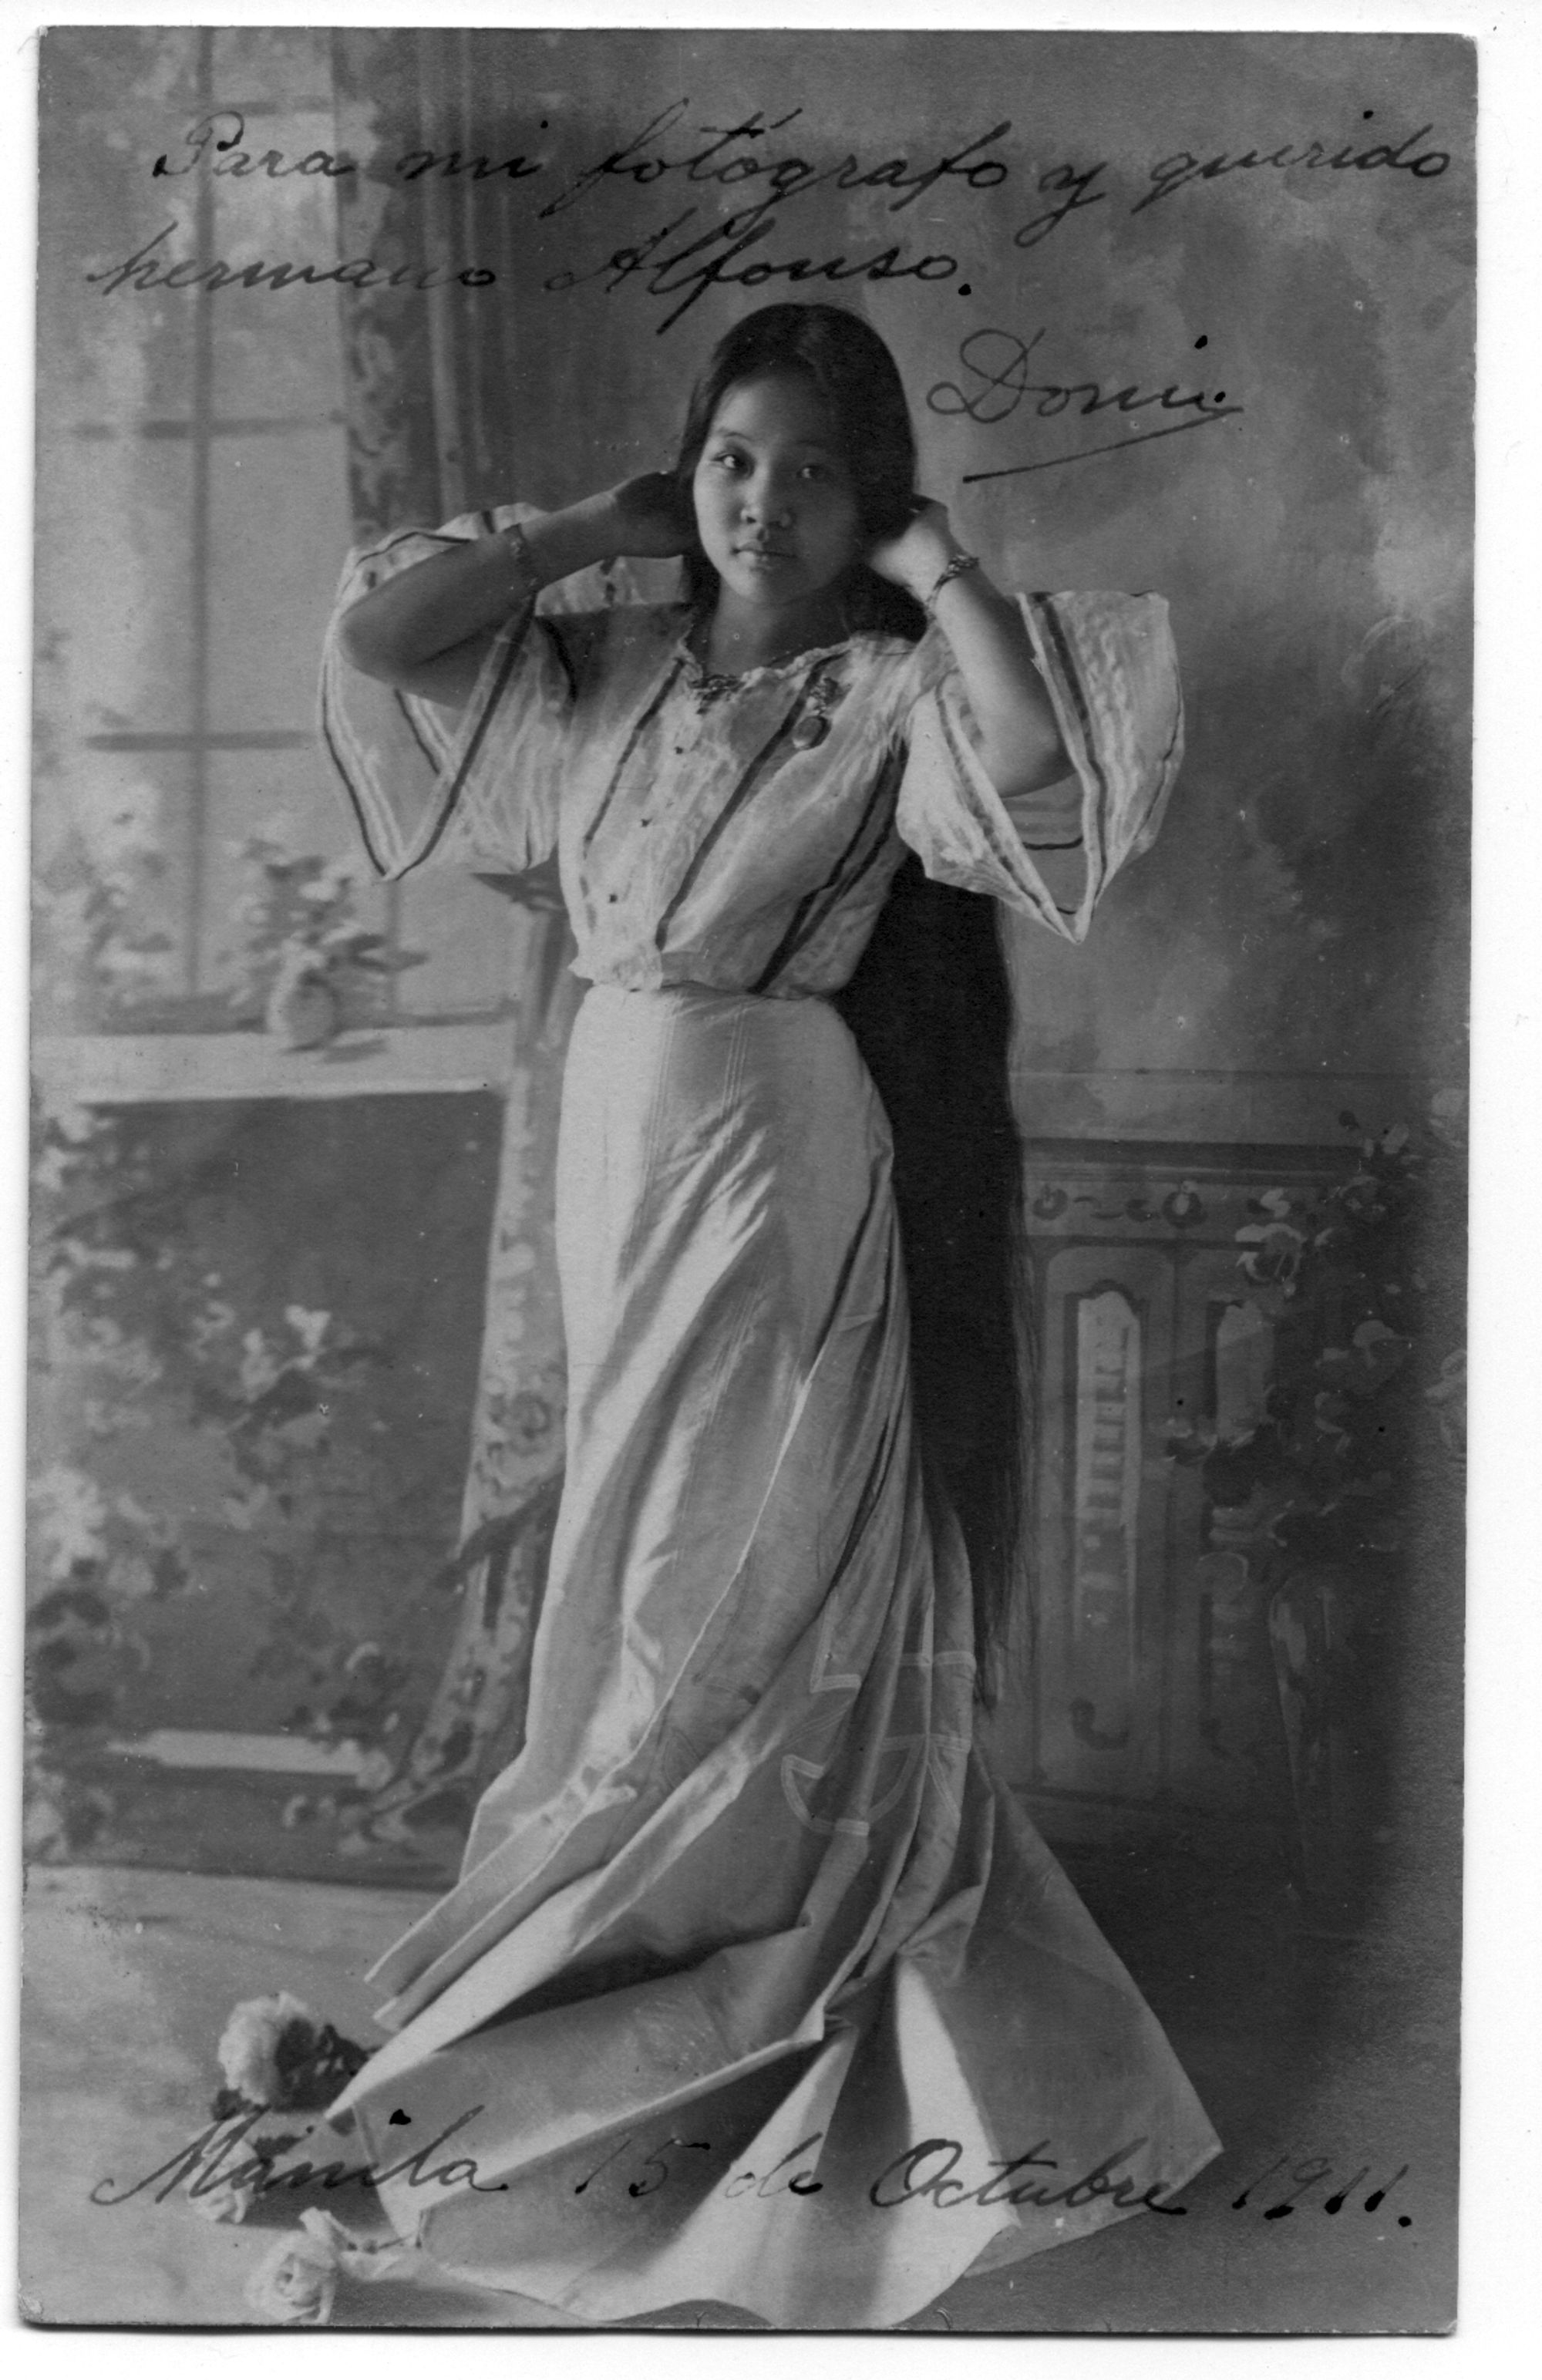  A portraiture of a woman who is wearing a flowing dress and posing for the camera. Both of her arms are raised as she coyly tucks her hair back. She looks directly at the camera. There is cursive script above and below the portraiture.